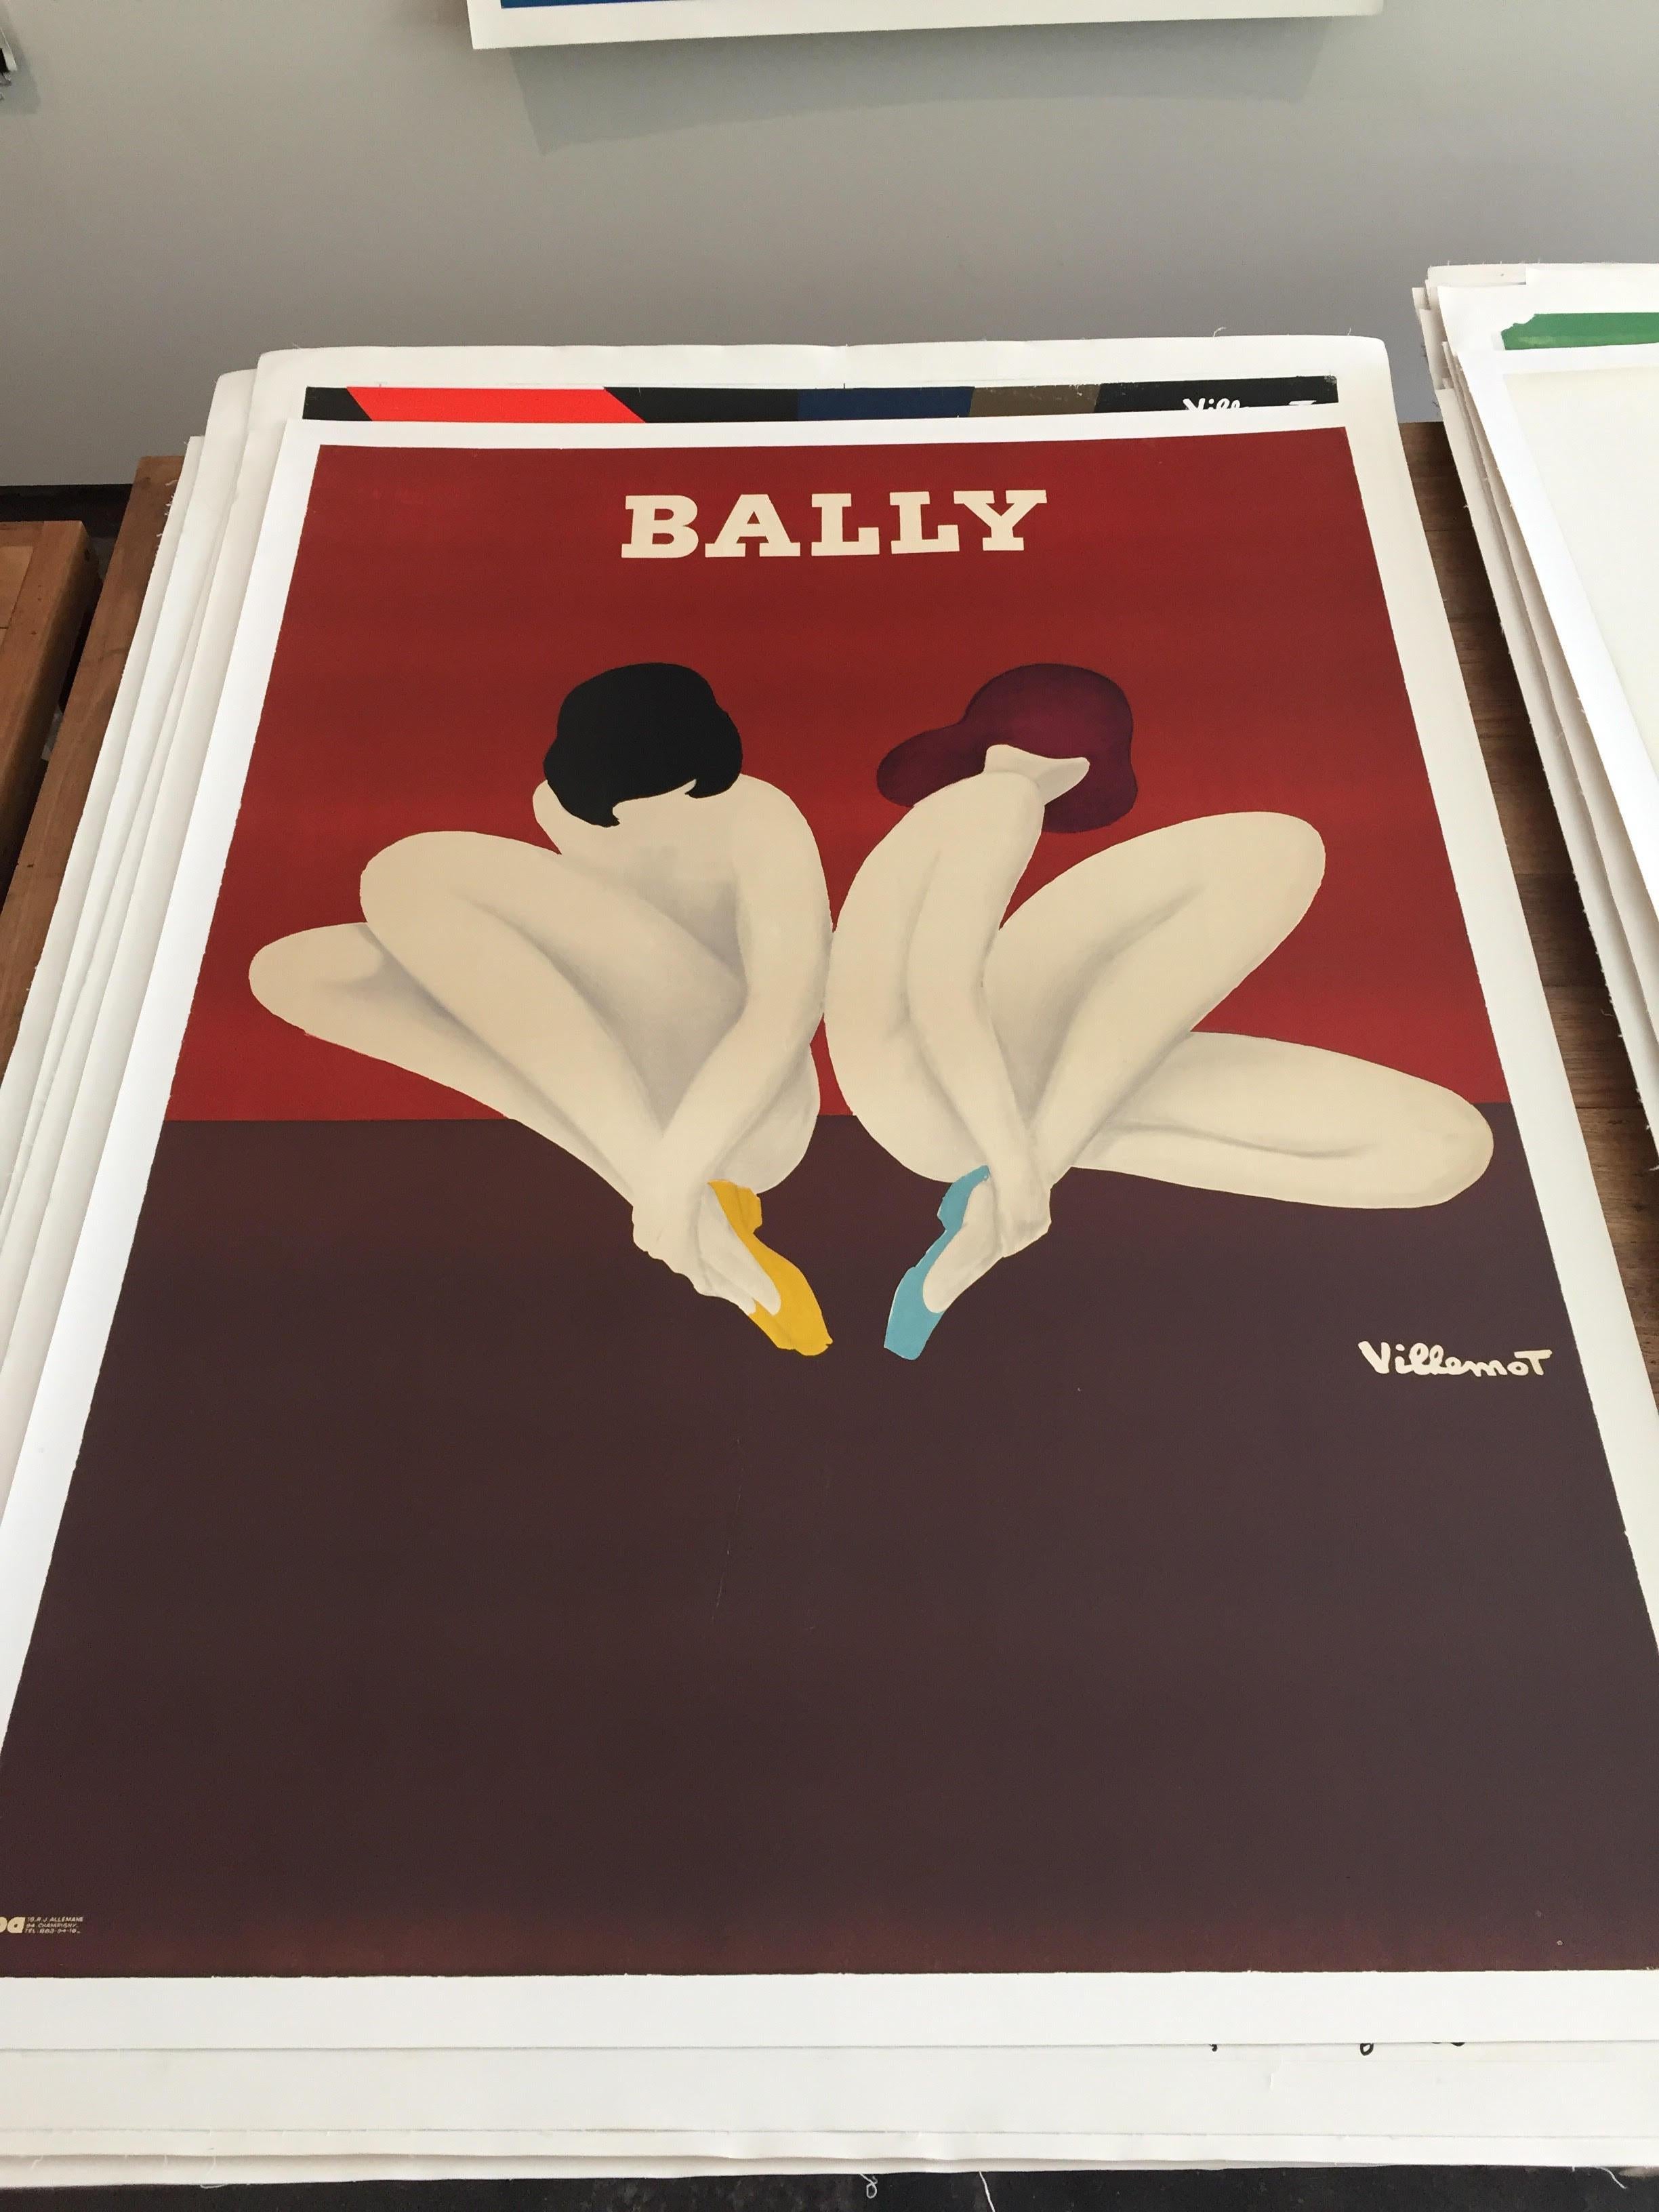 Original Vintage French Shoe Advertising Poster 'Bally Lotus' by Villemot, 1977 In Good Condition For Sale In Melbourne, Victoria